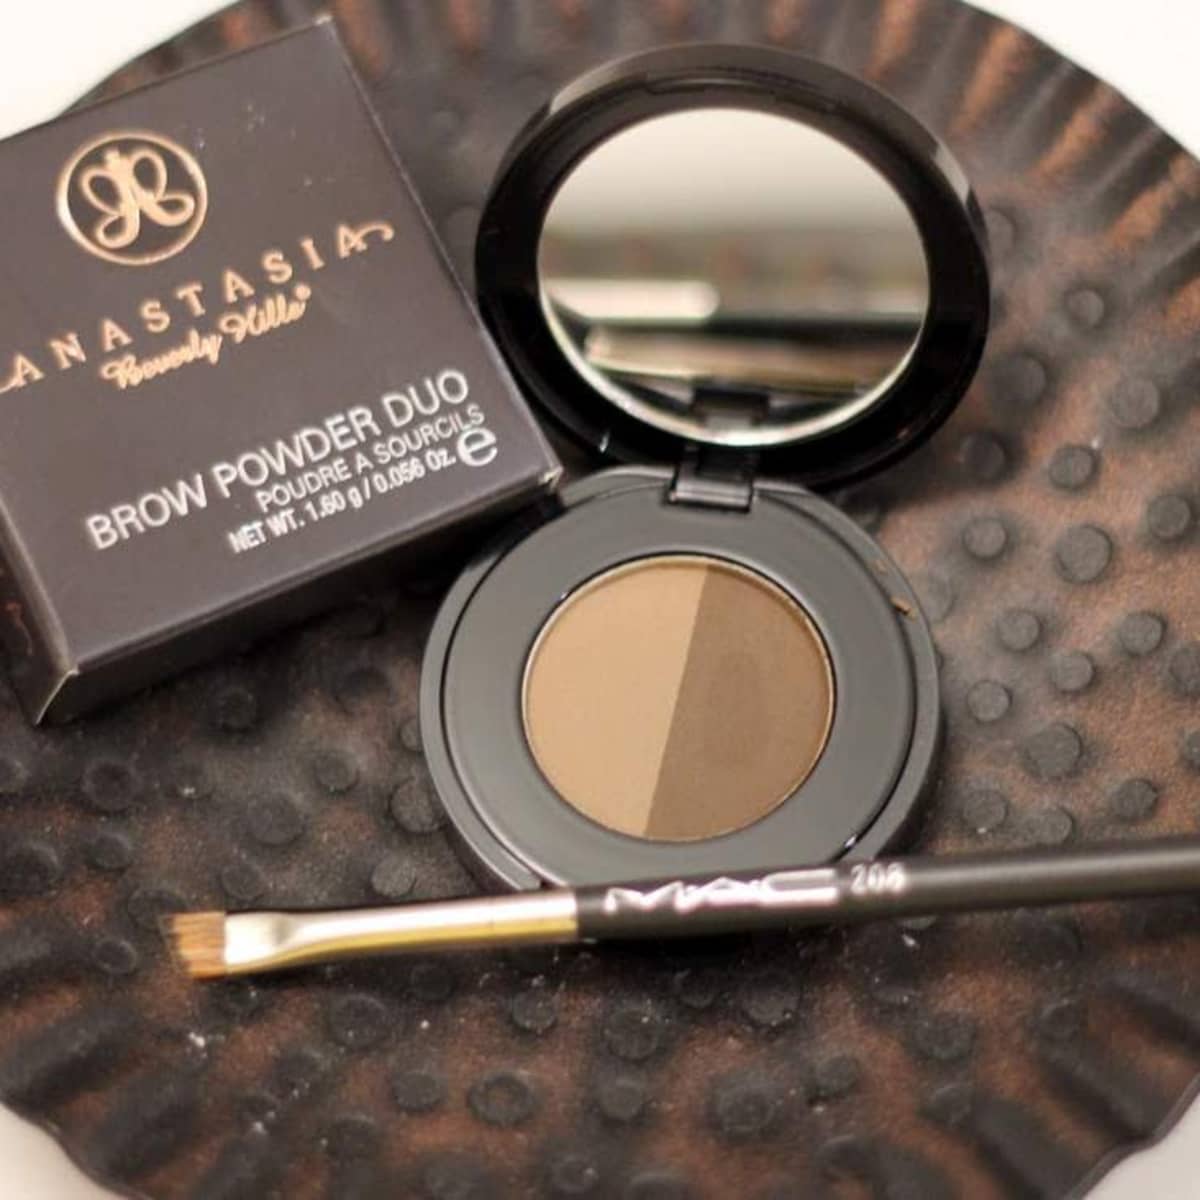 Review of Anastasia Beverly Hills Brow Powder Duo - HubPages